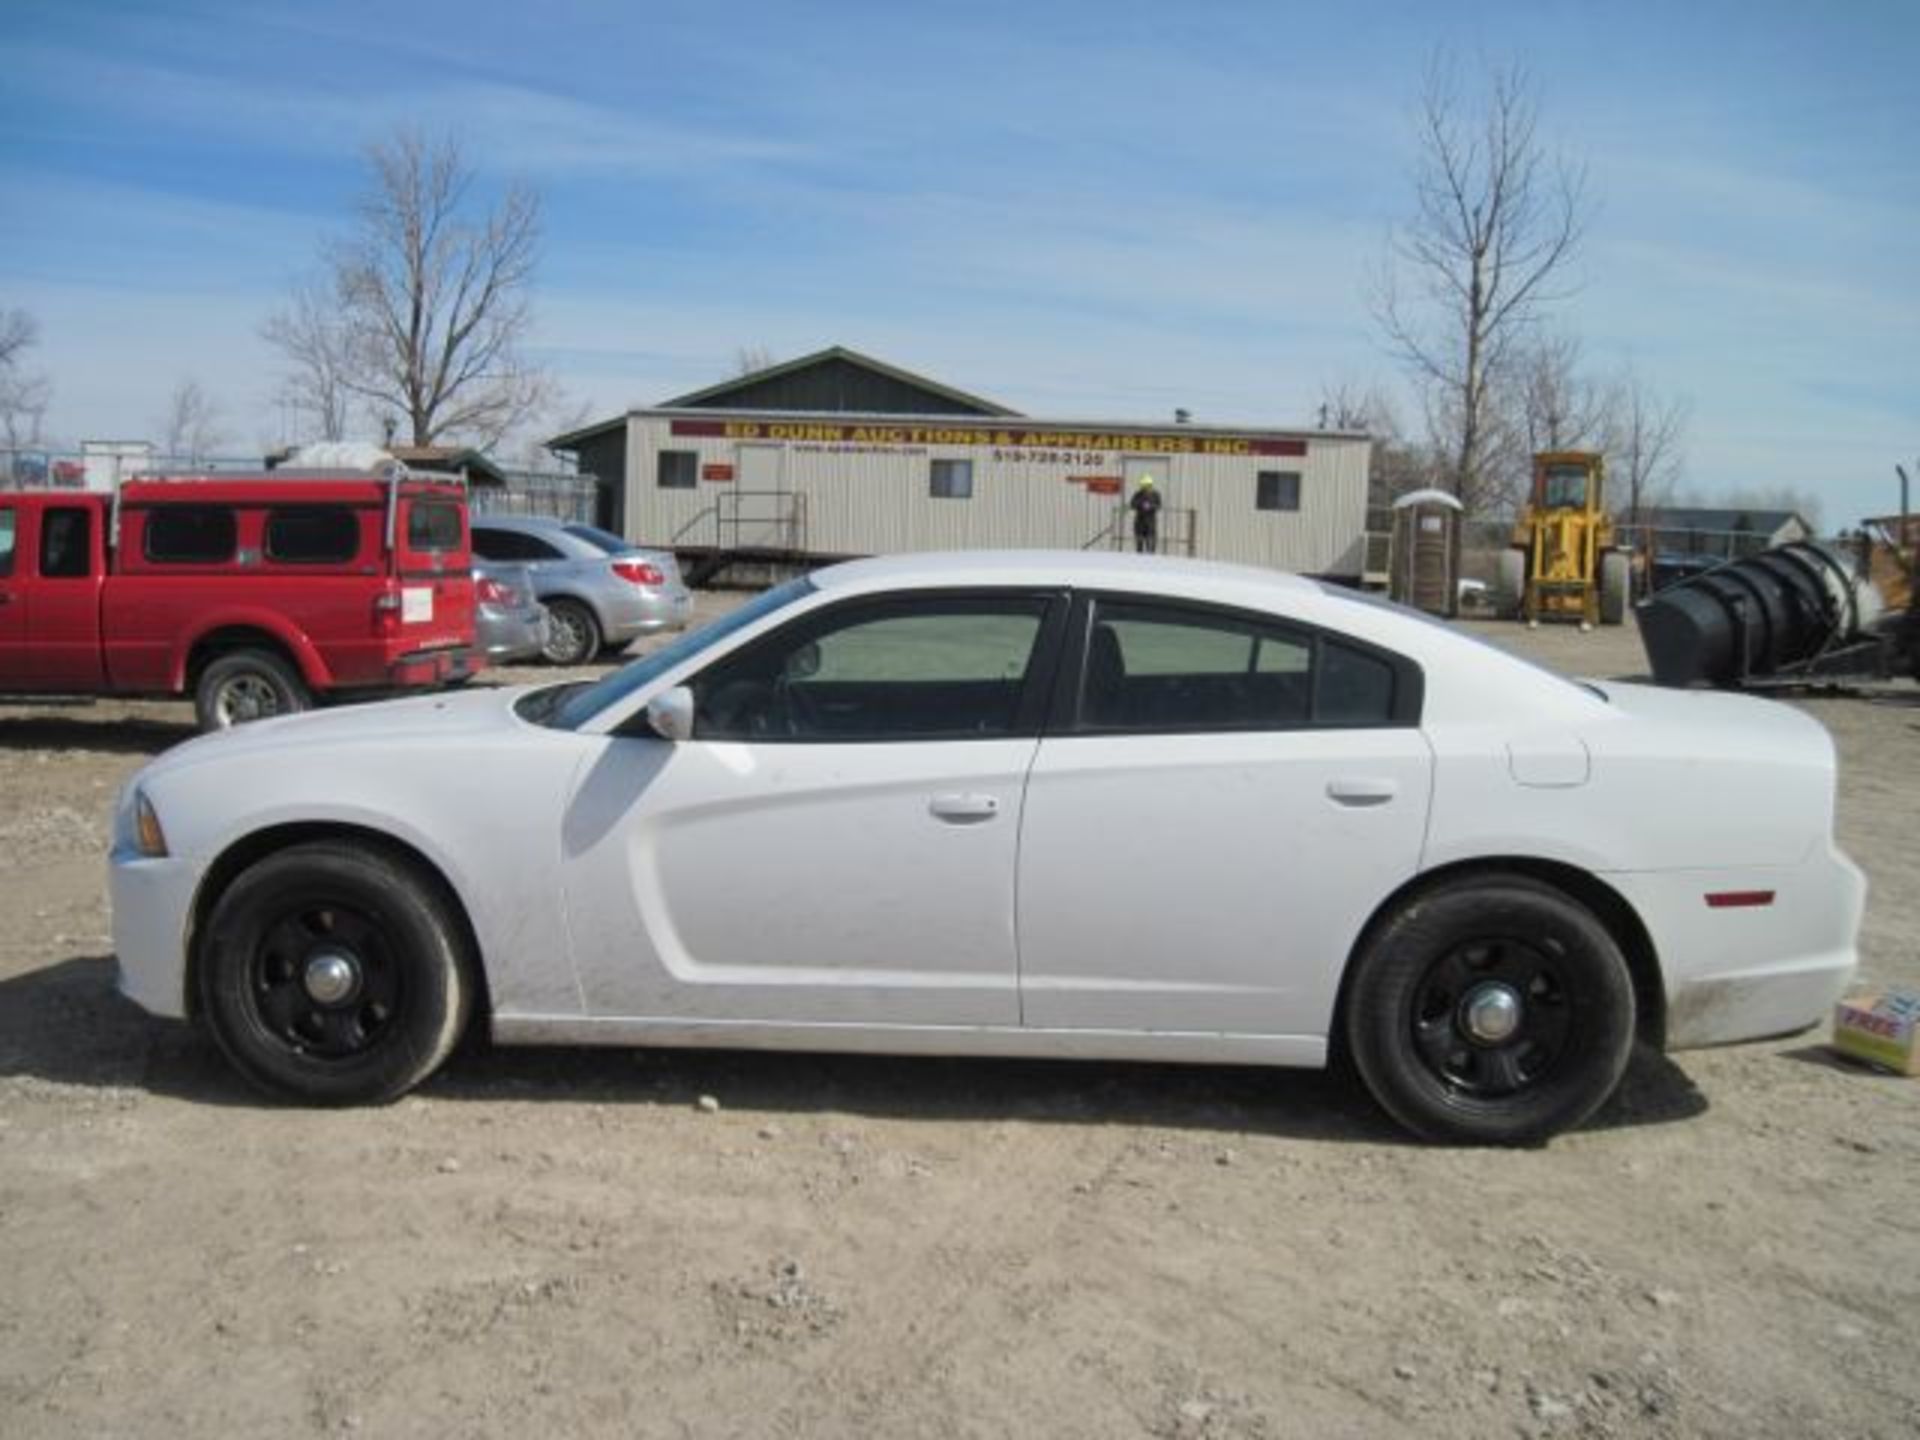 Lot 35 -  Lot# 35 2011 Dodge Charger 2011 Dodge Charger; 5.7L V8; tires fair; no scratches or dings;